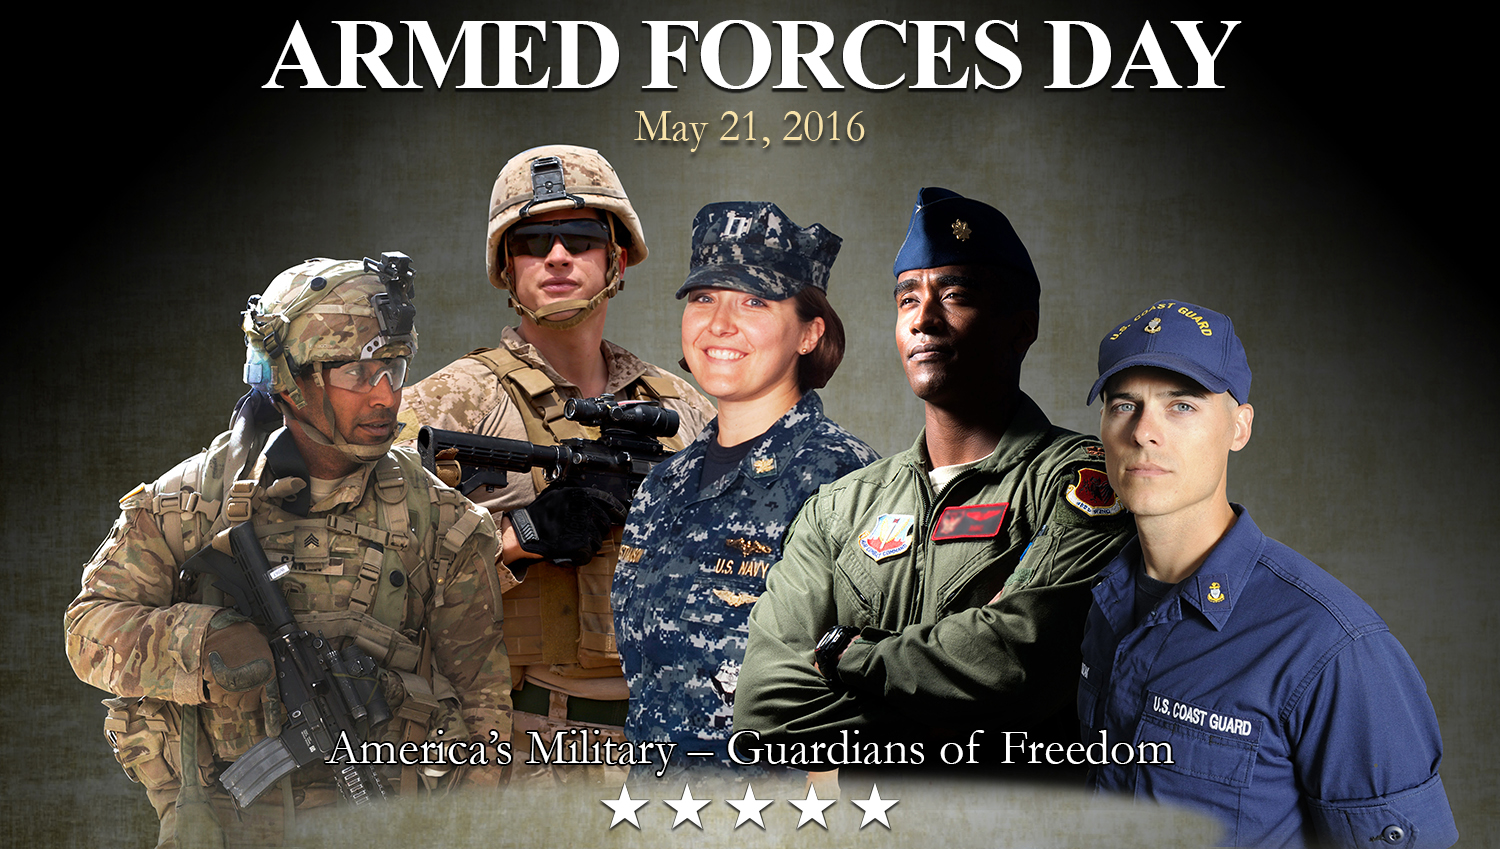 armed forces day 2021